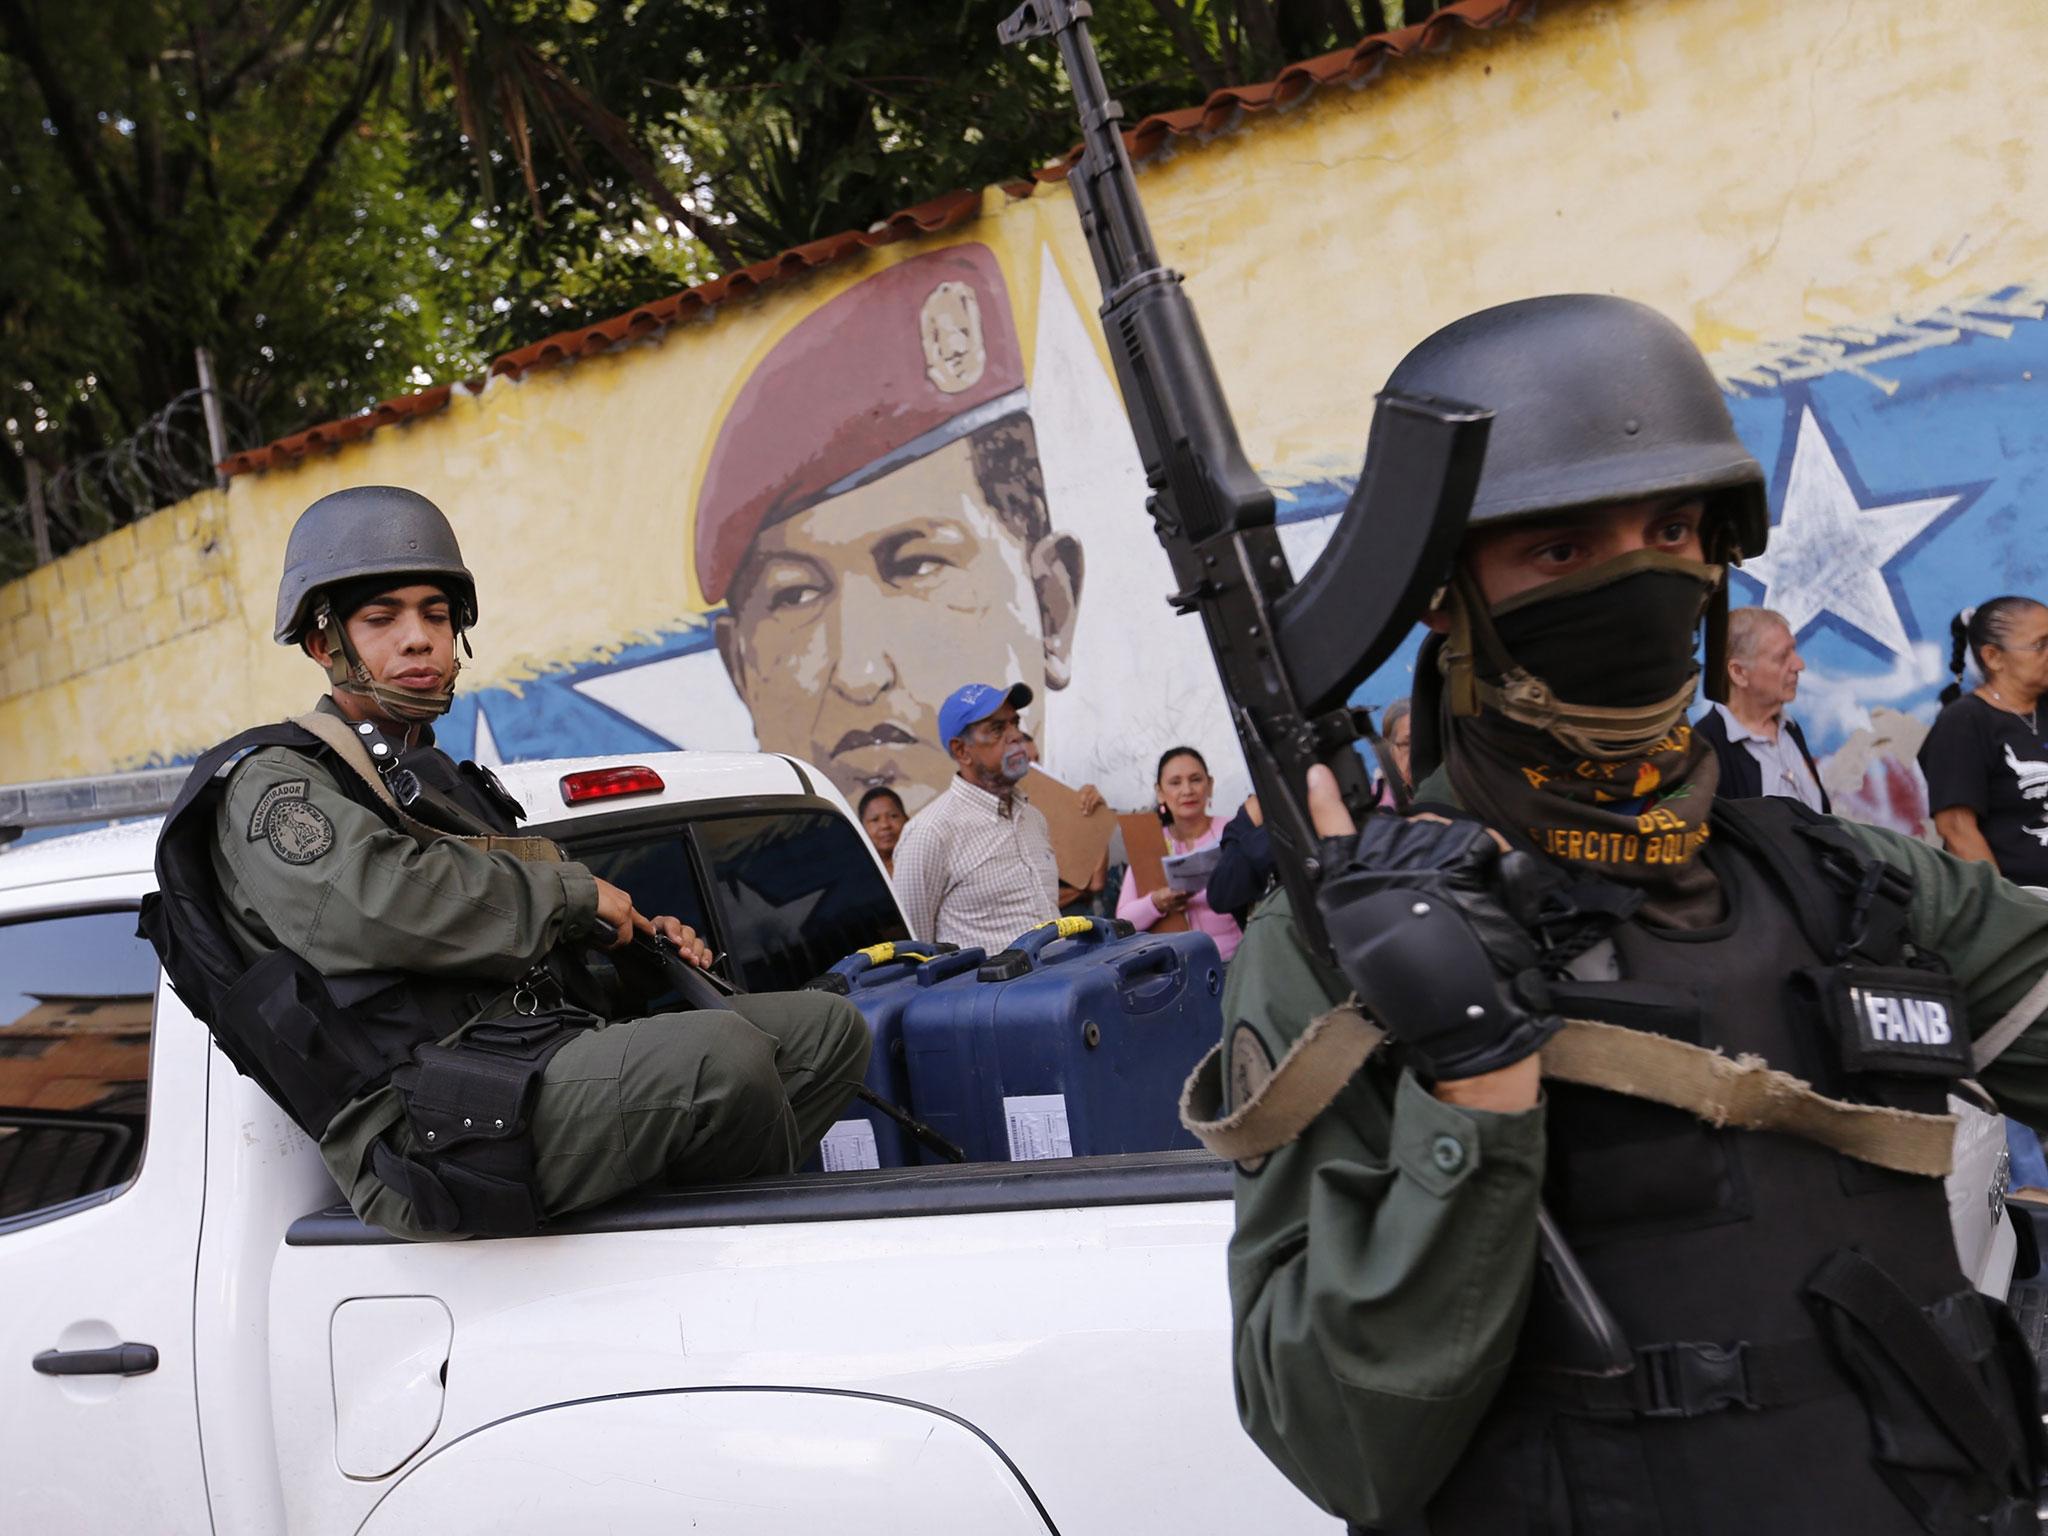 Soldiers stand guard as people wait in line in front of a mural of the late Venezuelan President Hugo Chavez before casting their votes at a polling station during the Constituent Assembly election in Caracas, Venezuela